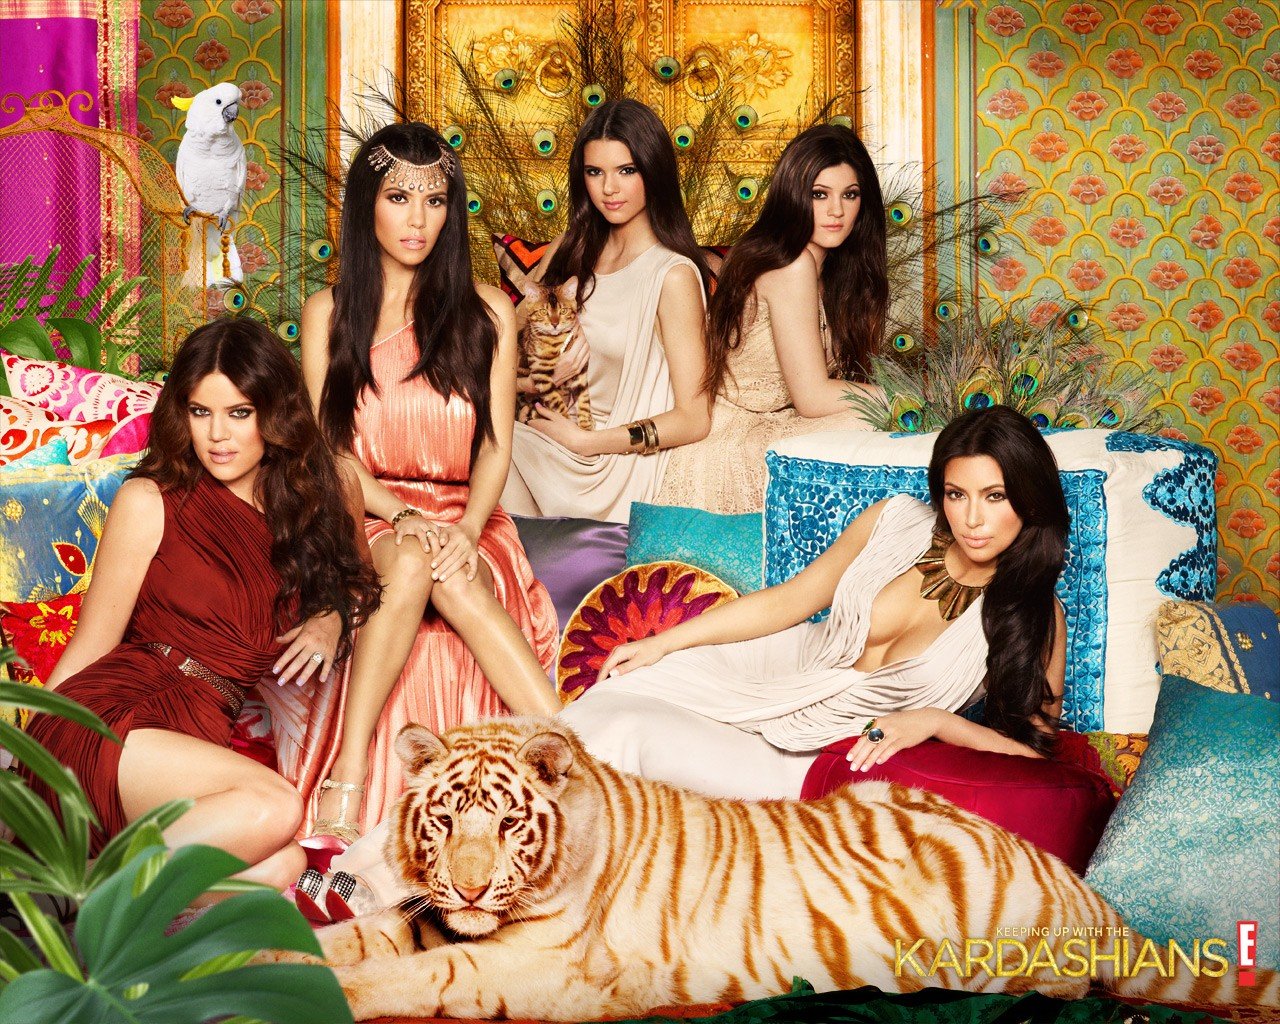 Keeping Up With The Kardashians Wallpaper